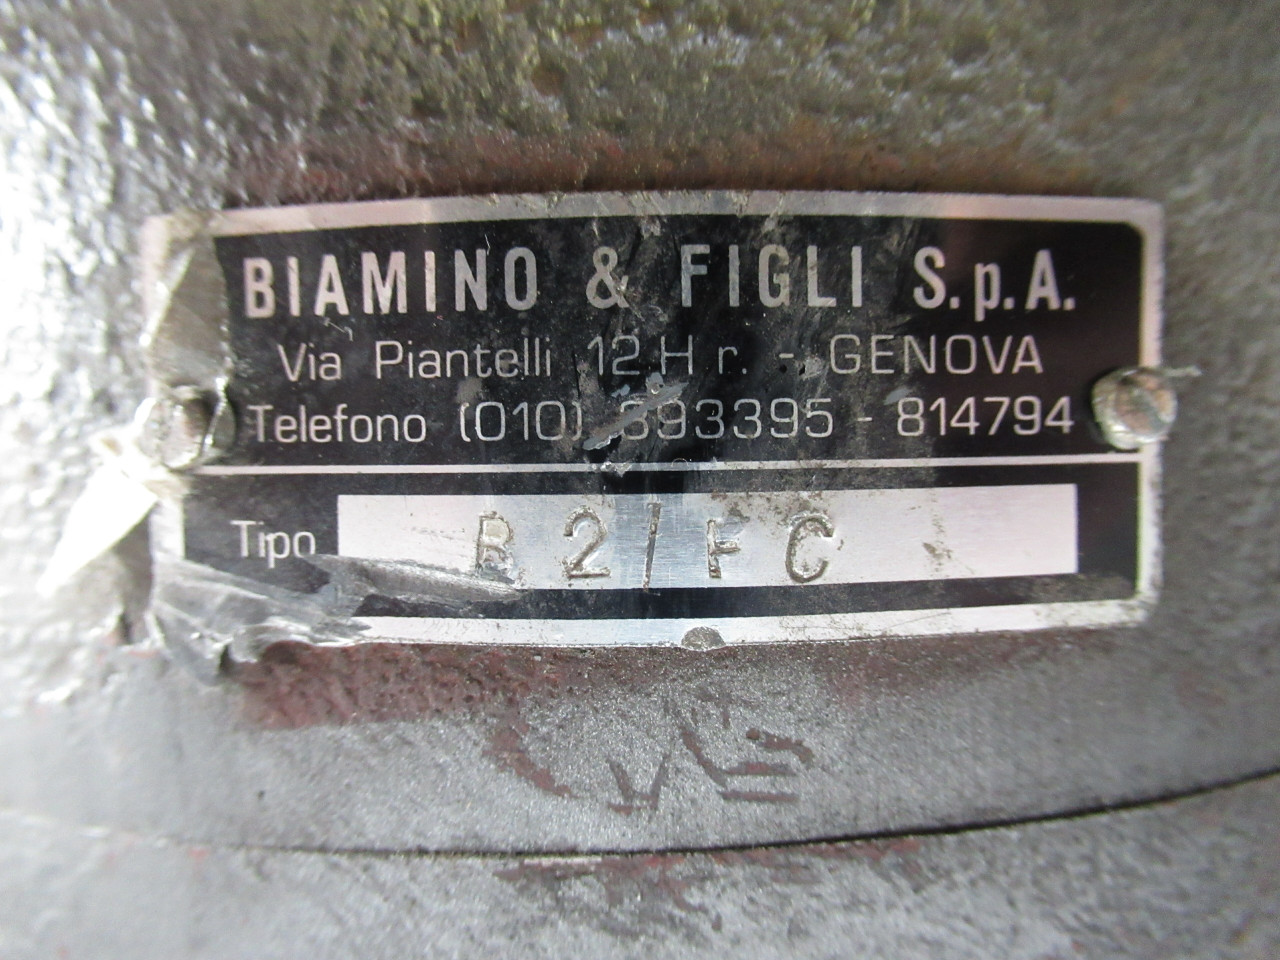 Biamino & Figli S.p.A B2/FC Variable Gear Unit 24.06mm Output GREY ! NOP !